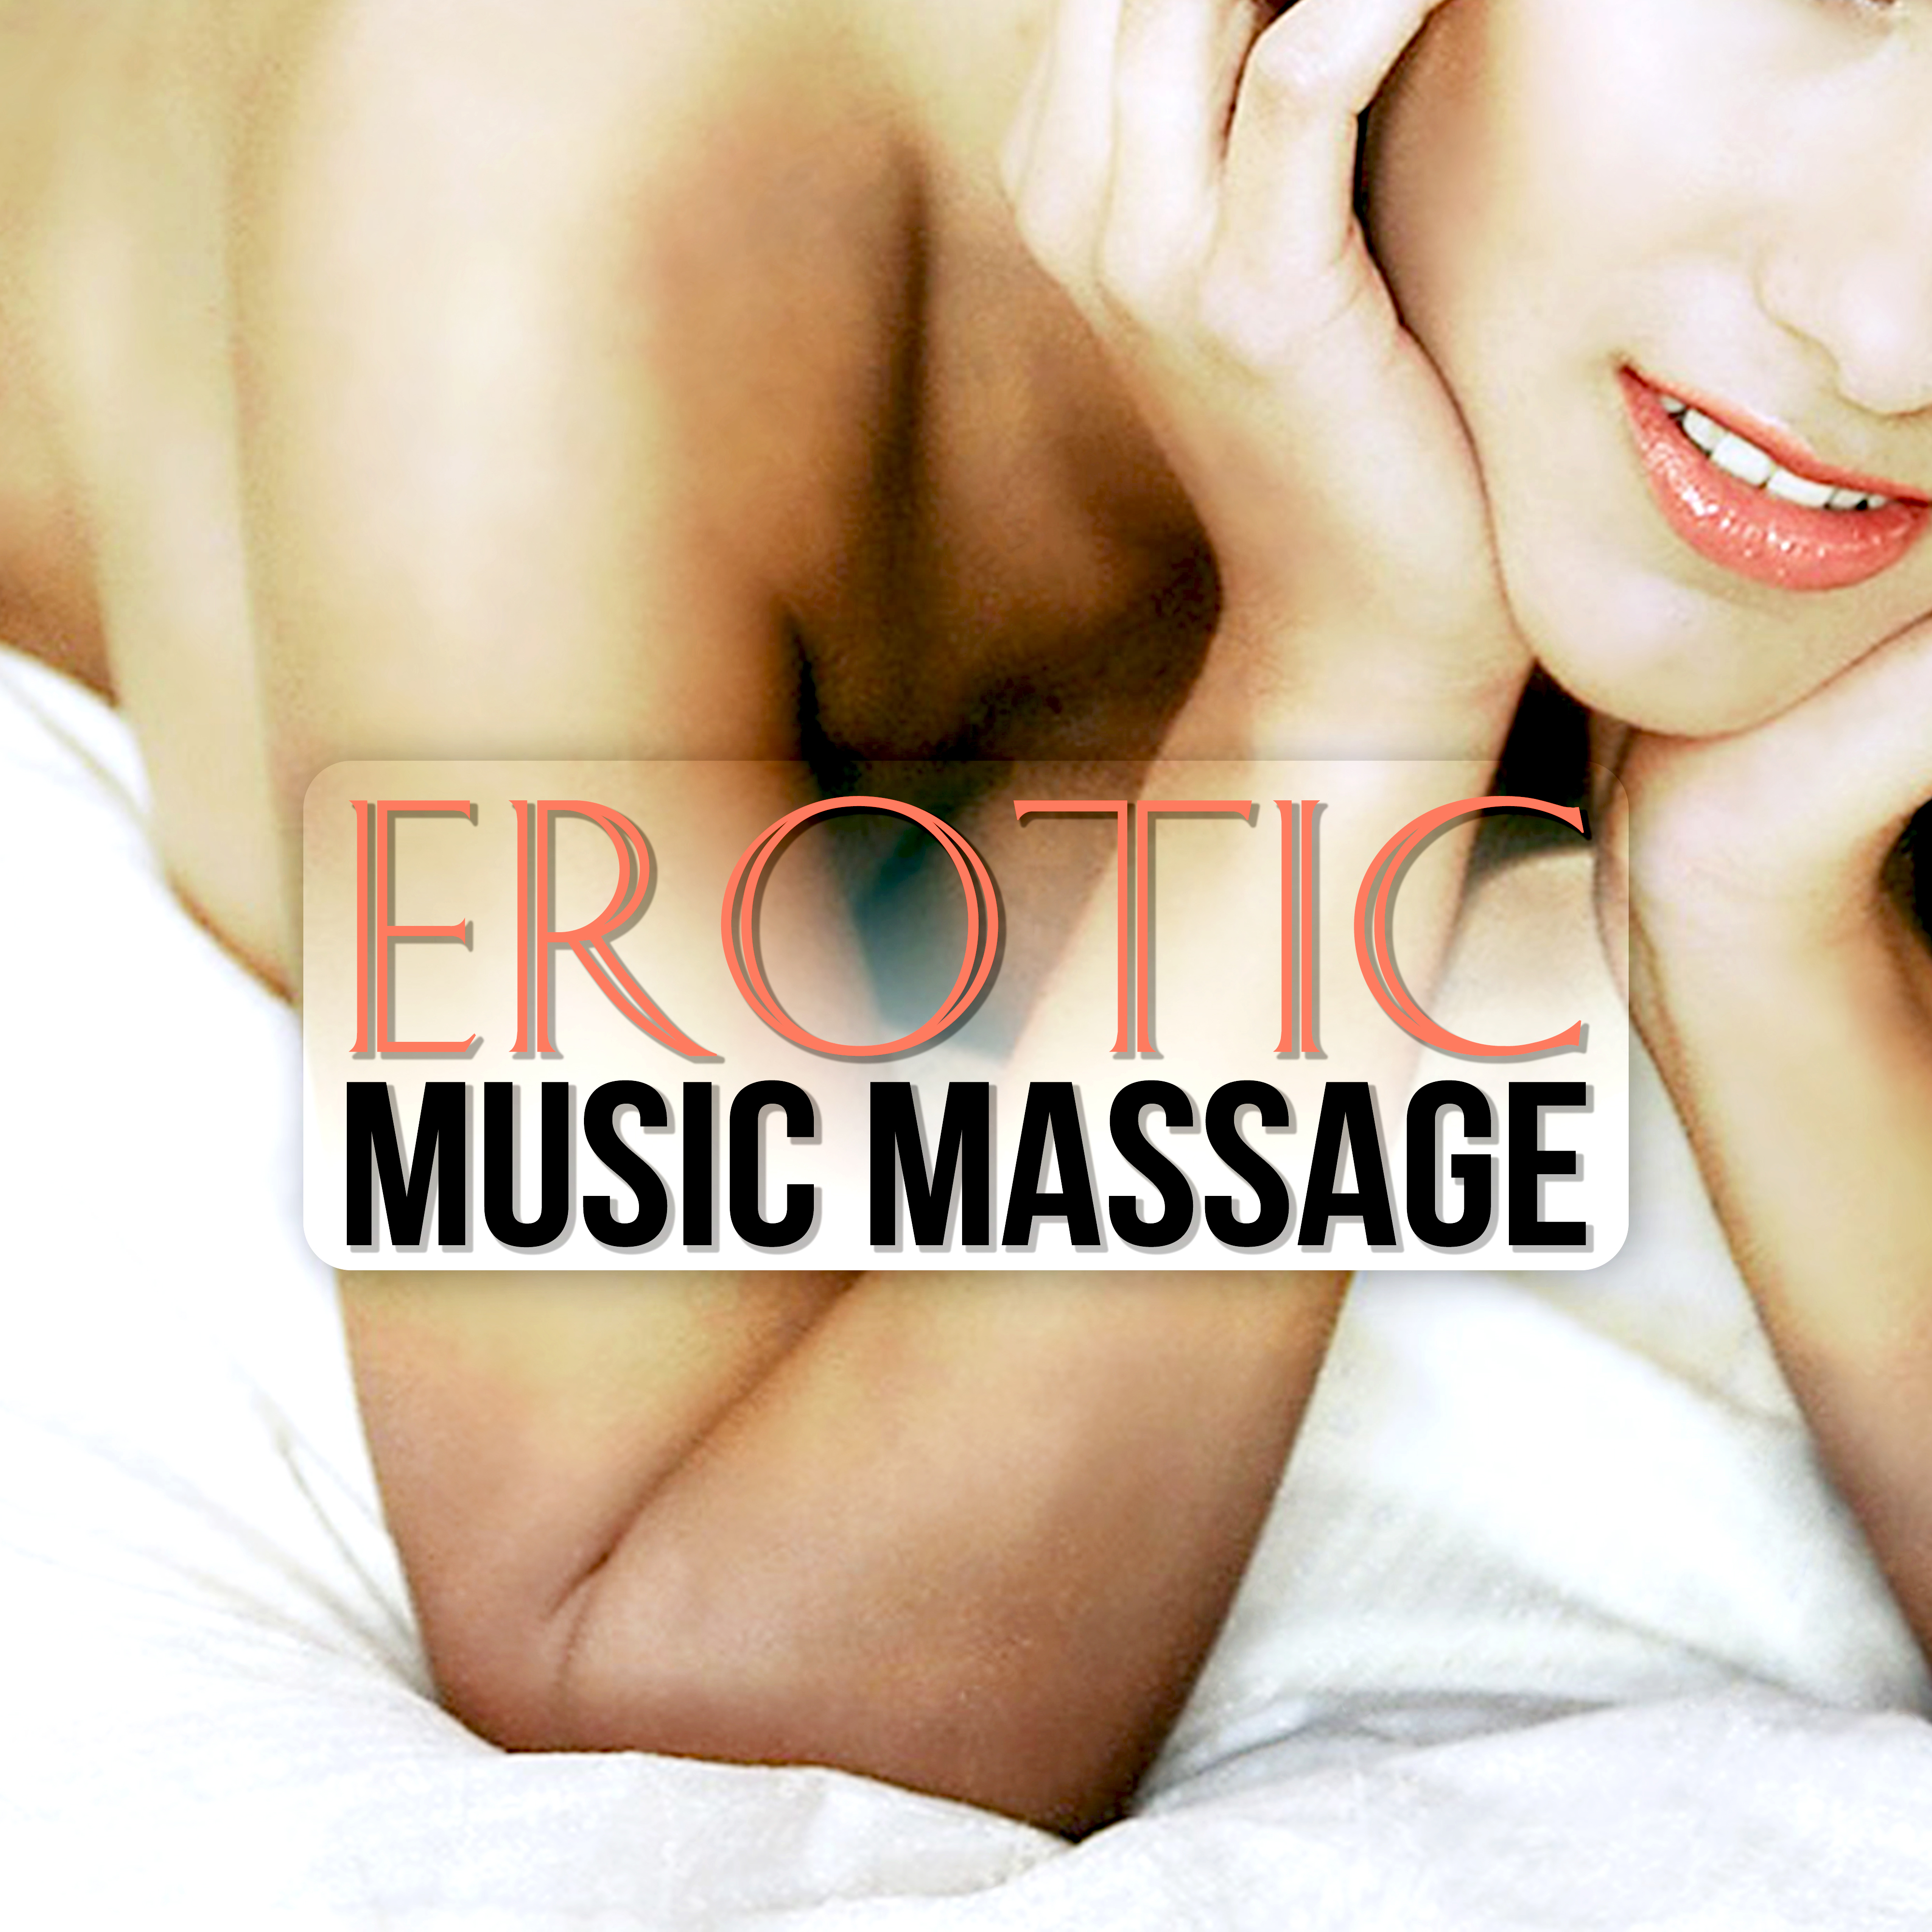 Erotic Music Massage - Sensual Music for Lovers, Passionate & *********, Tantric Music, Kamasutra, Intimate Moments, Mind and Body Harmony